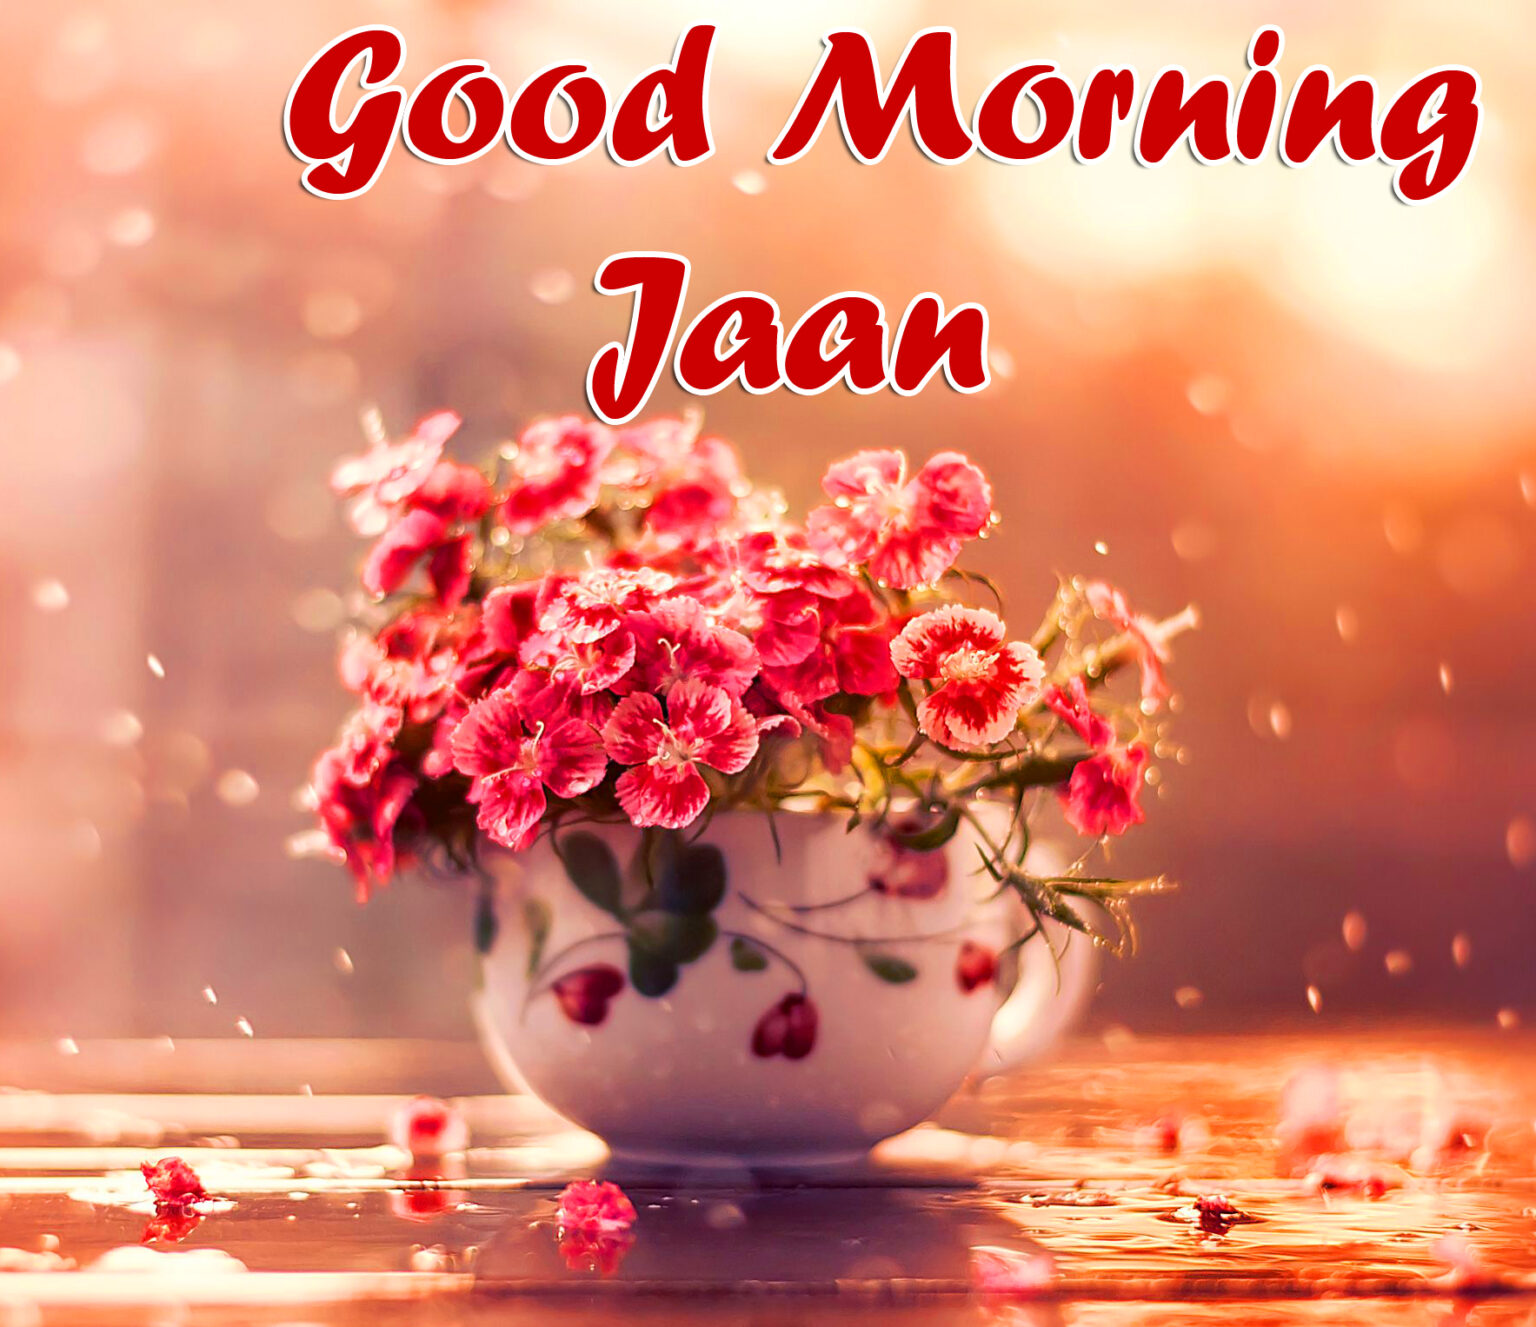 Good Morning Jaan Images